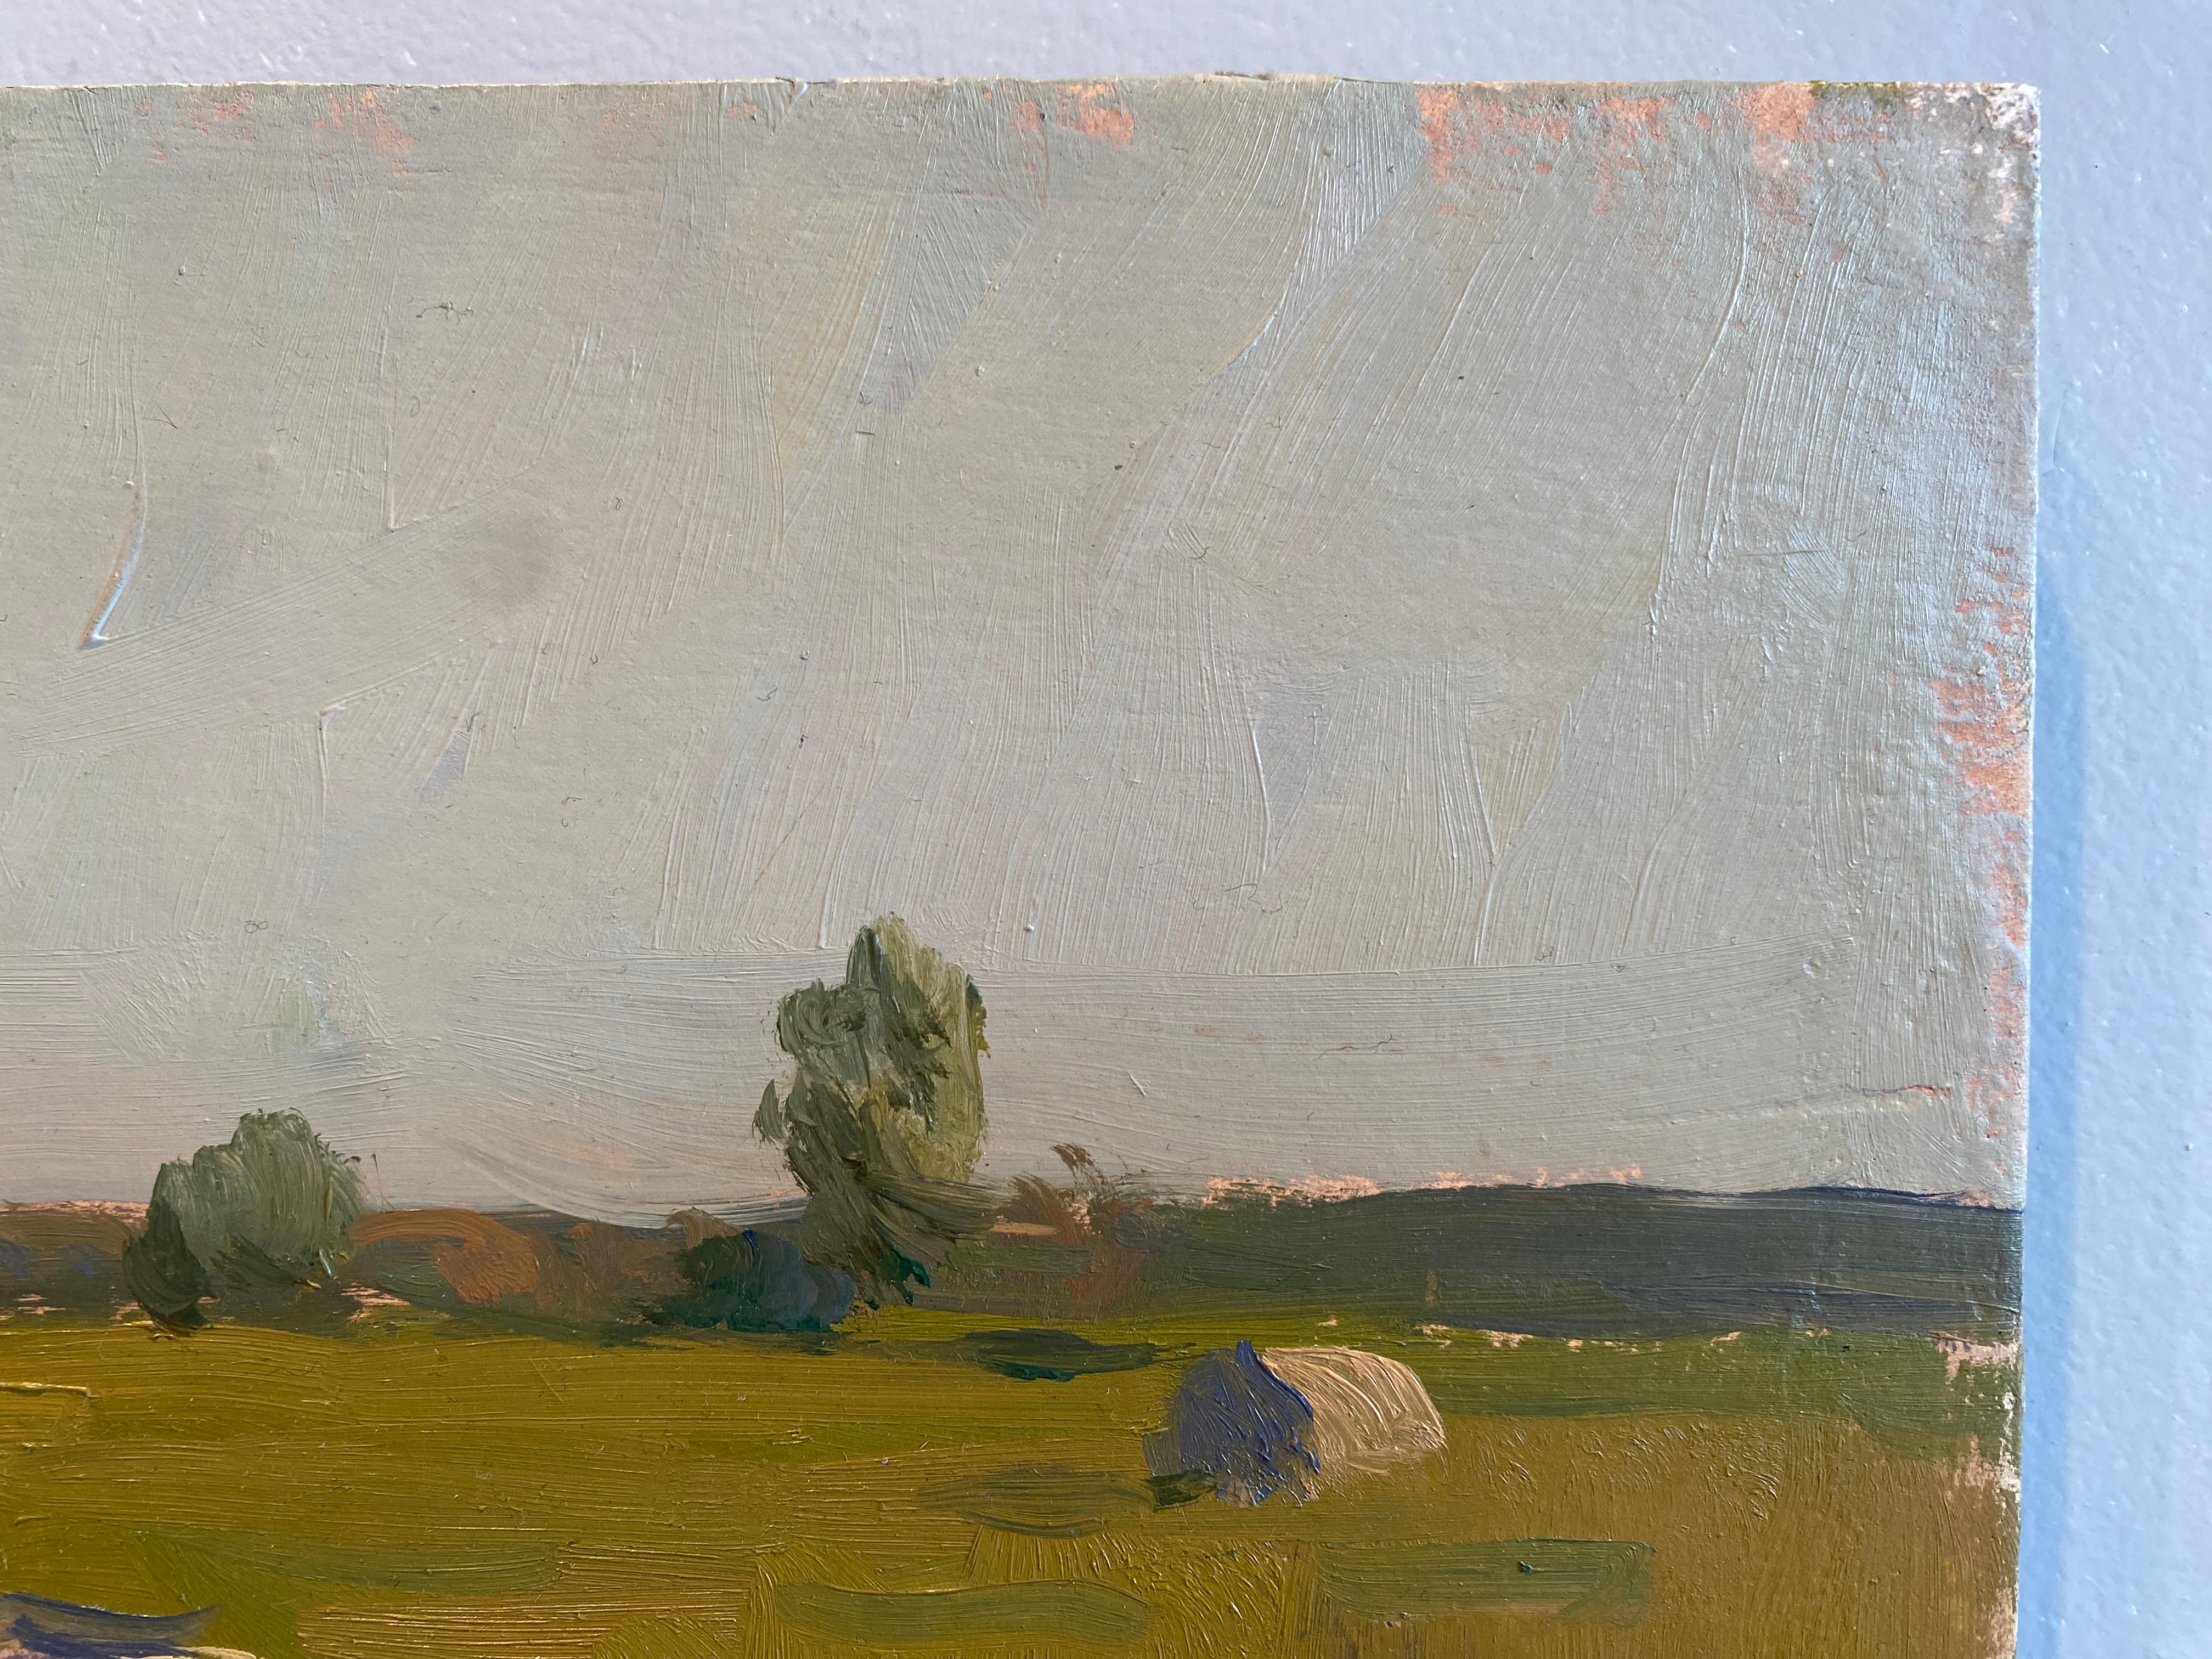 An oil painting of a Haystack in a grassy field. Painted en plein air on Gibson Lane, in Sagaponack, New York, during the summer of 2019. Butko focuses in on one particular haystack, carefully brushing in detailed strands of hay. Light catches and